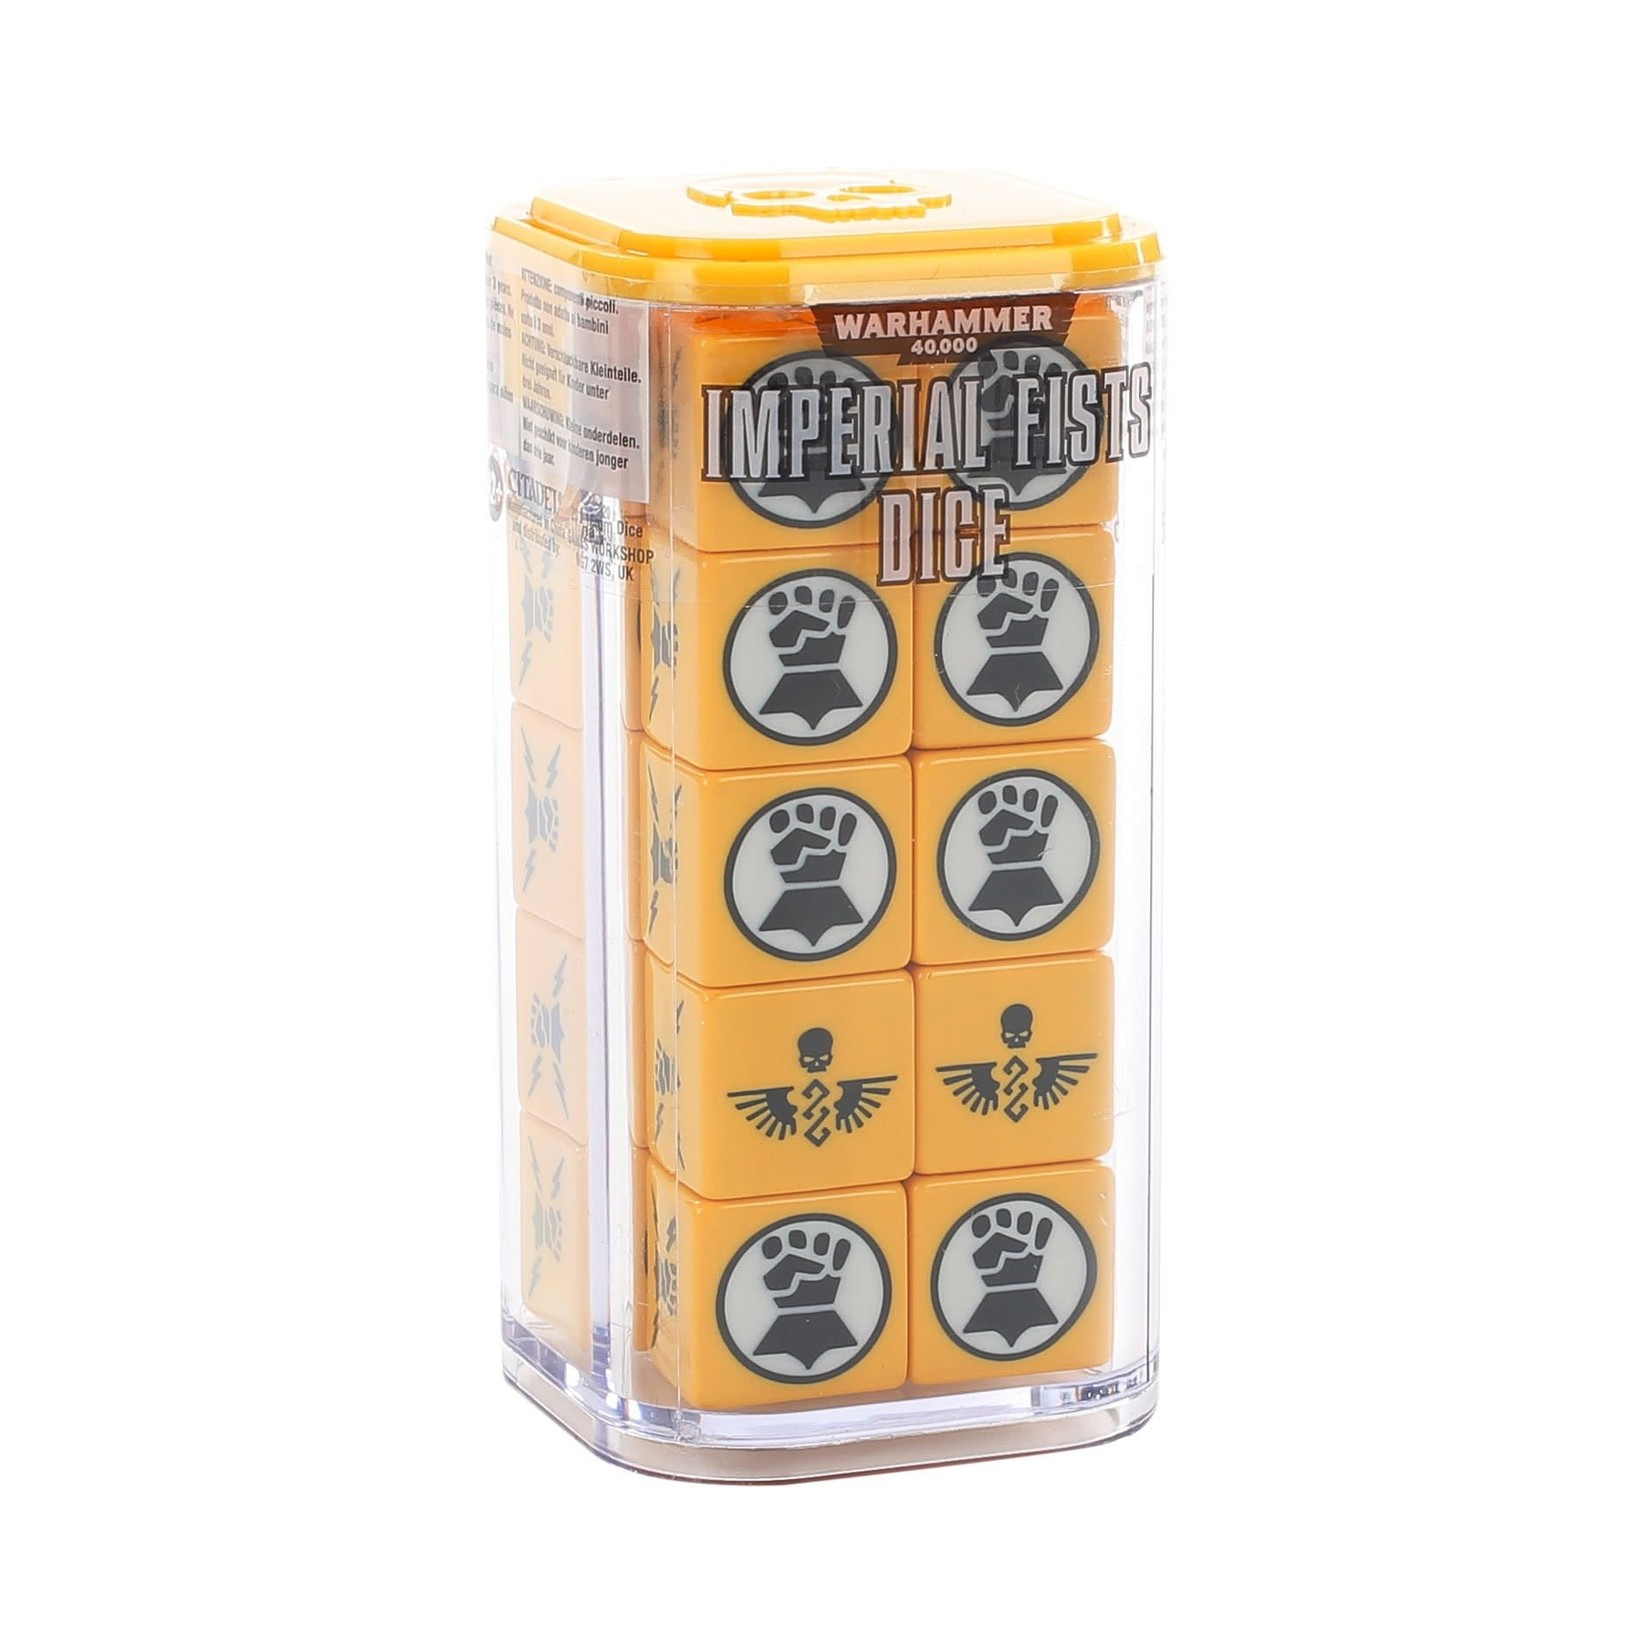 Games Workshop Imperial Fists Dice